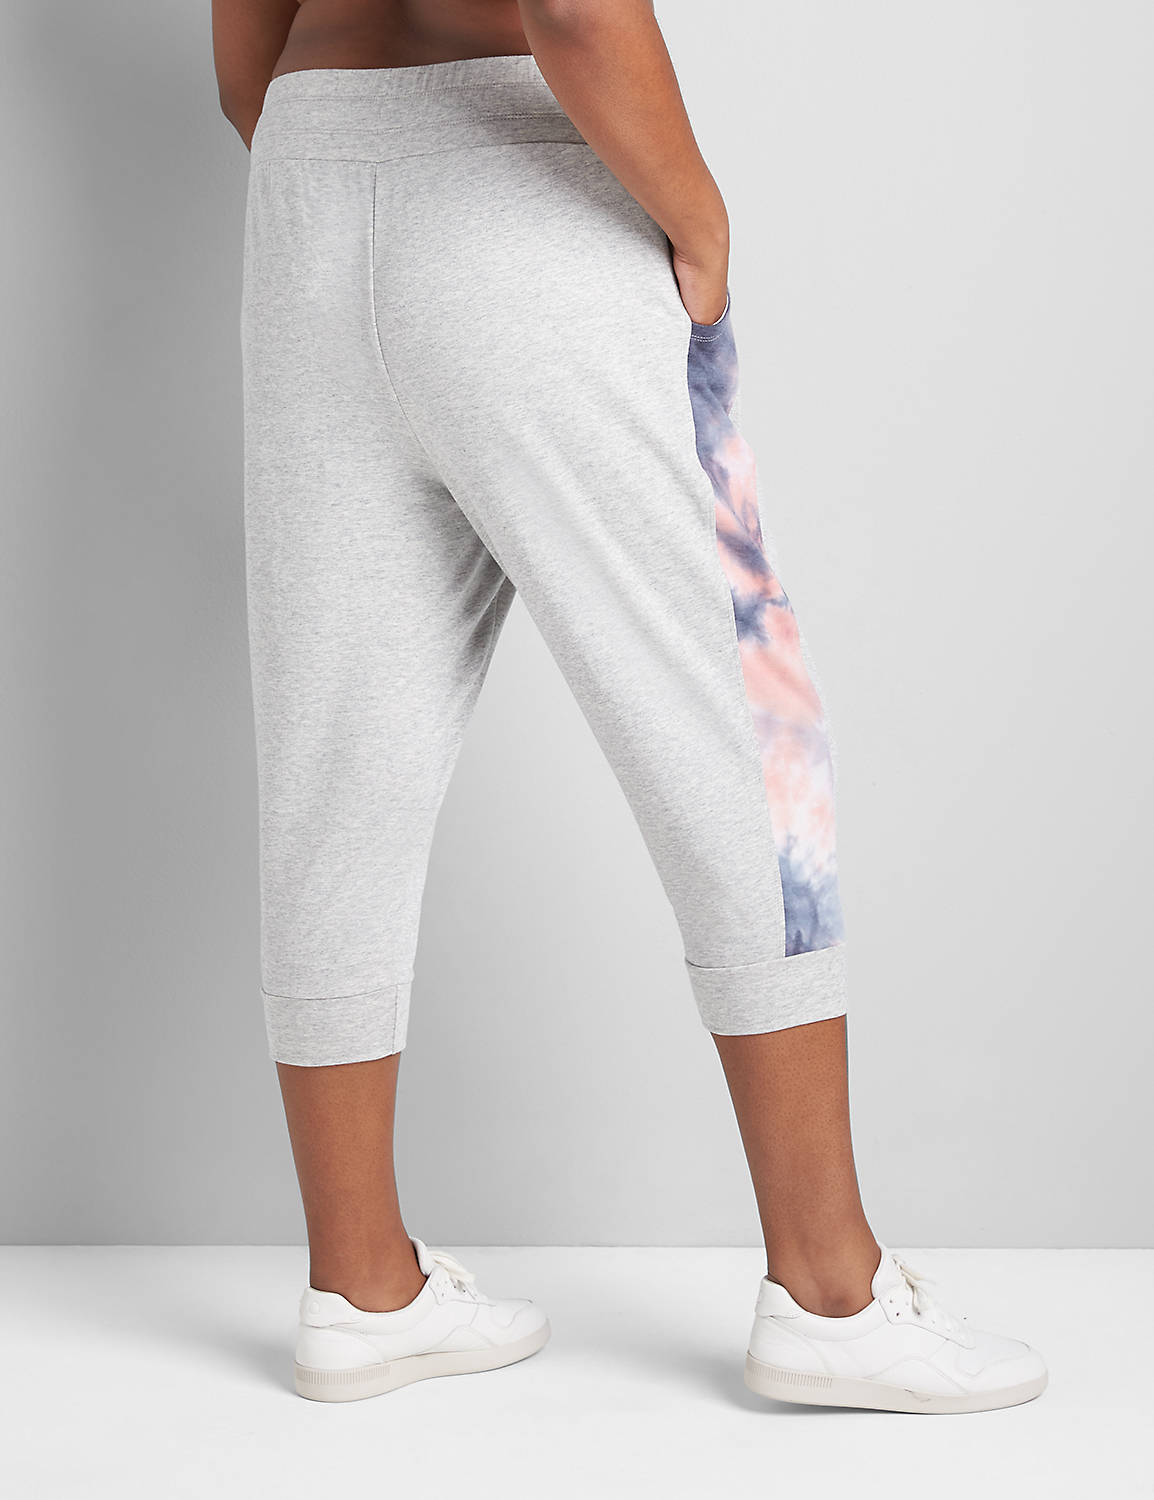 LIVI Mid Rise French Terry Capri Jogger Dye Effect Blocked 1122999:Grey Heather:38/40 Product Image 2